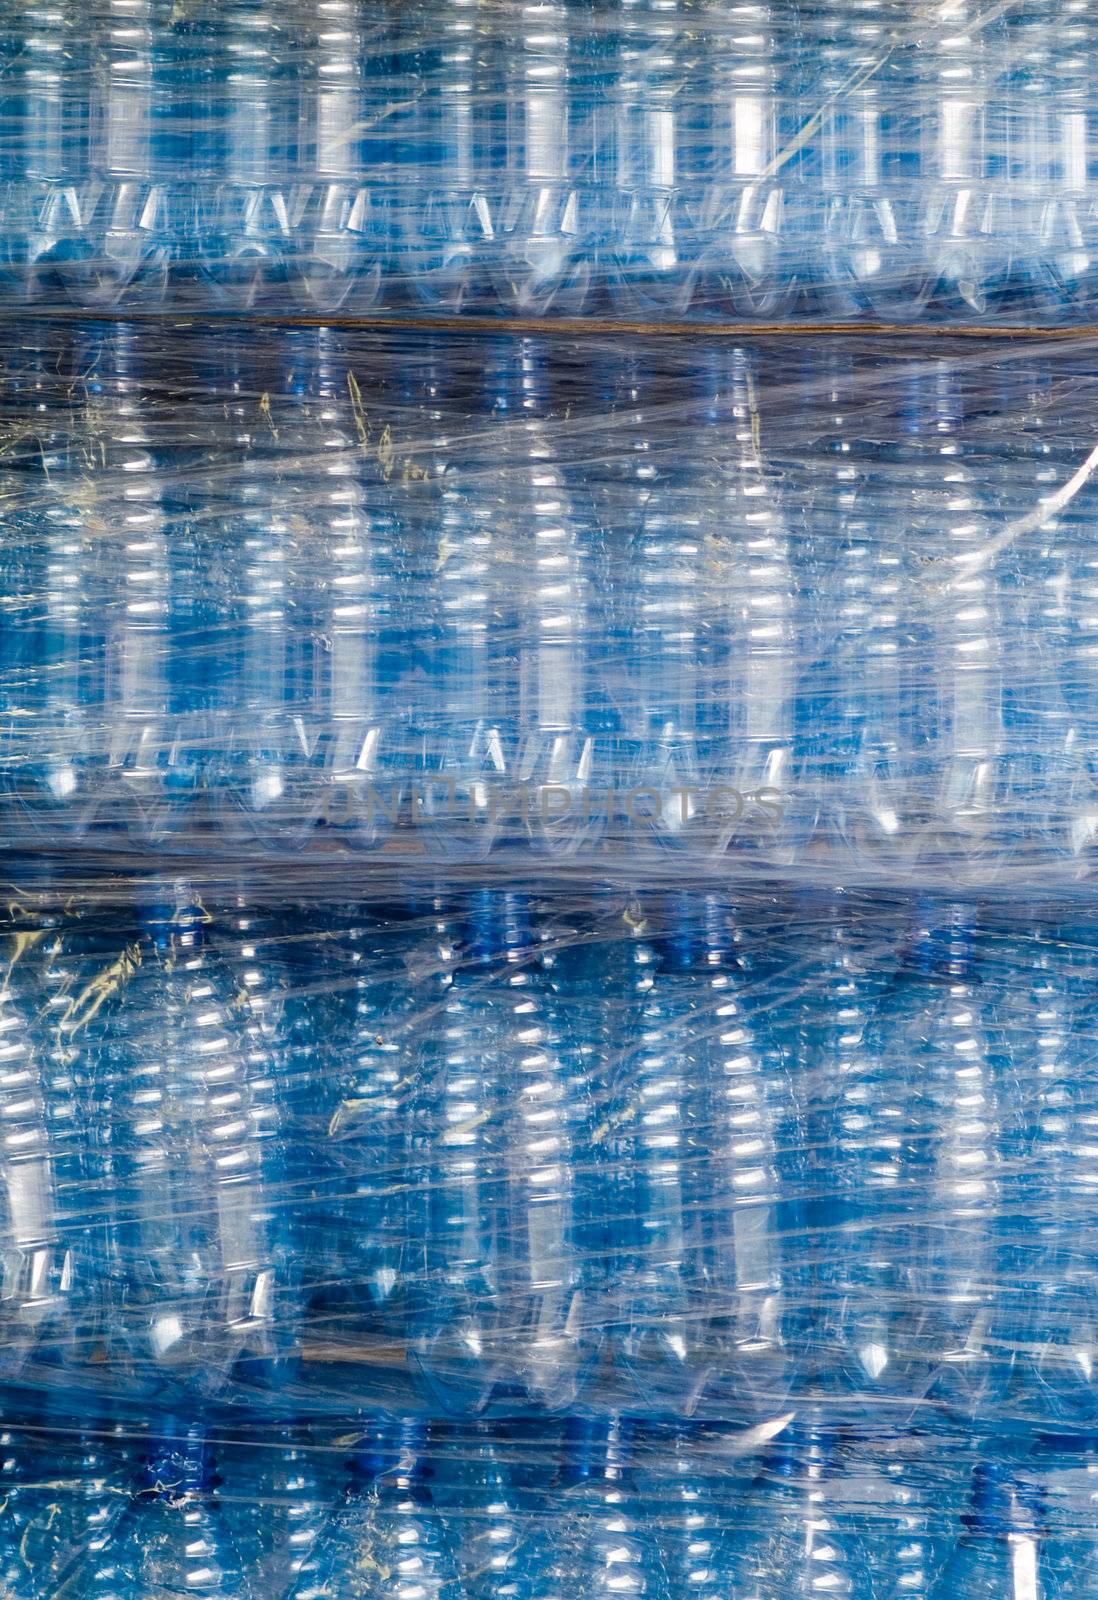 Packaged water bottles by alistaircotton